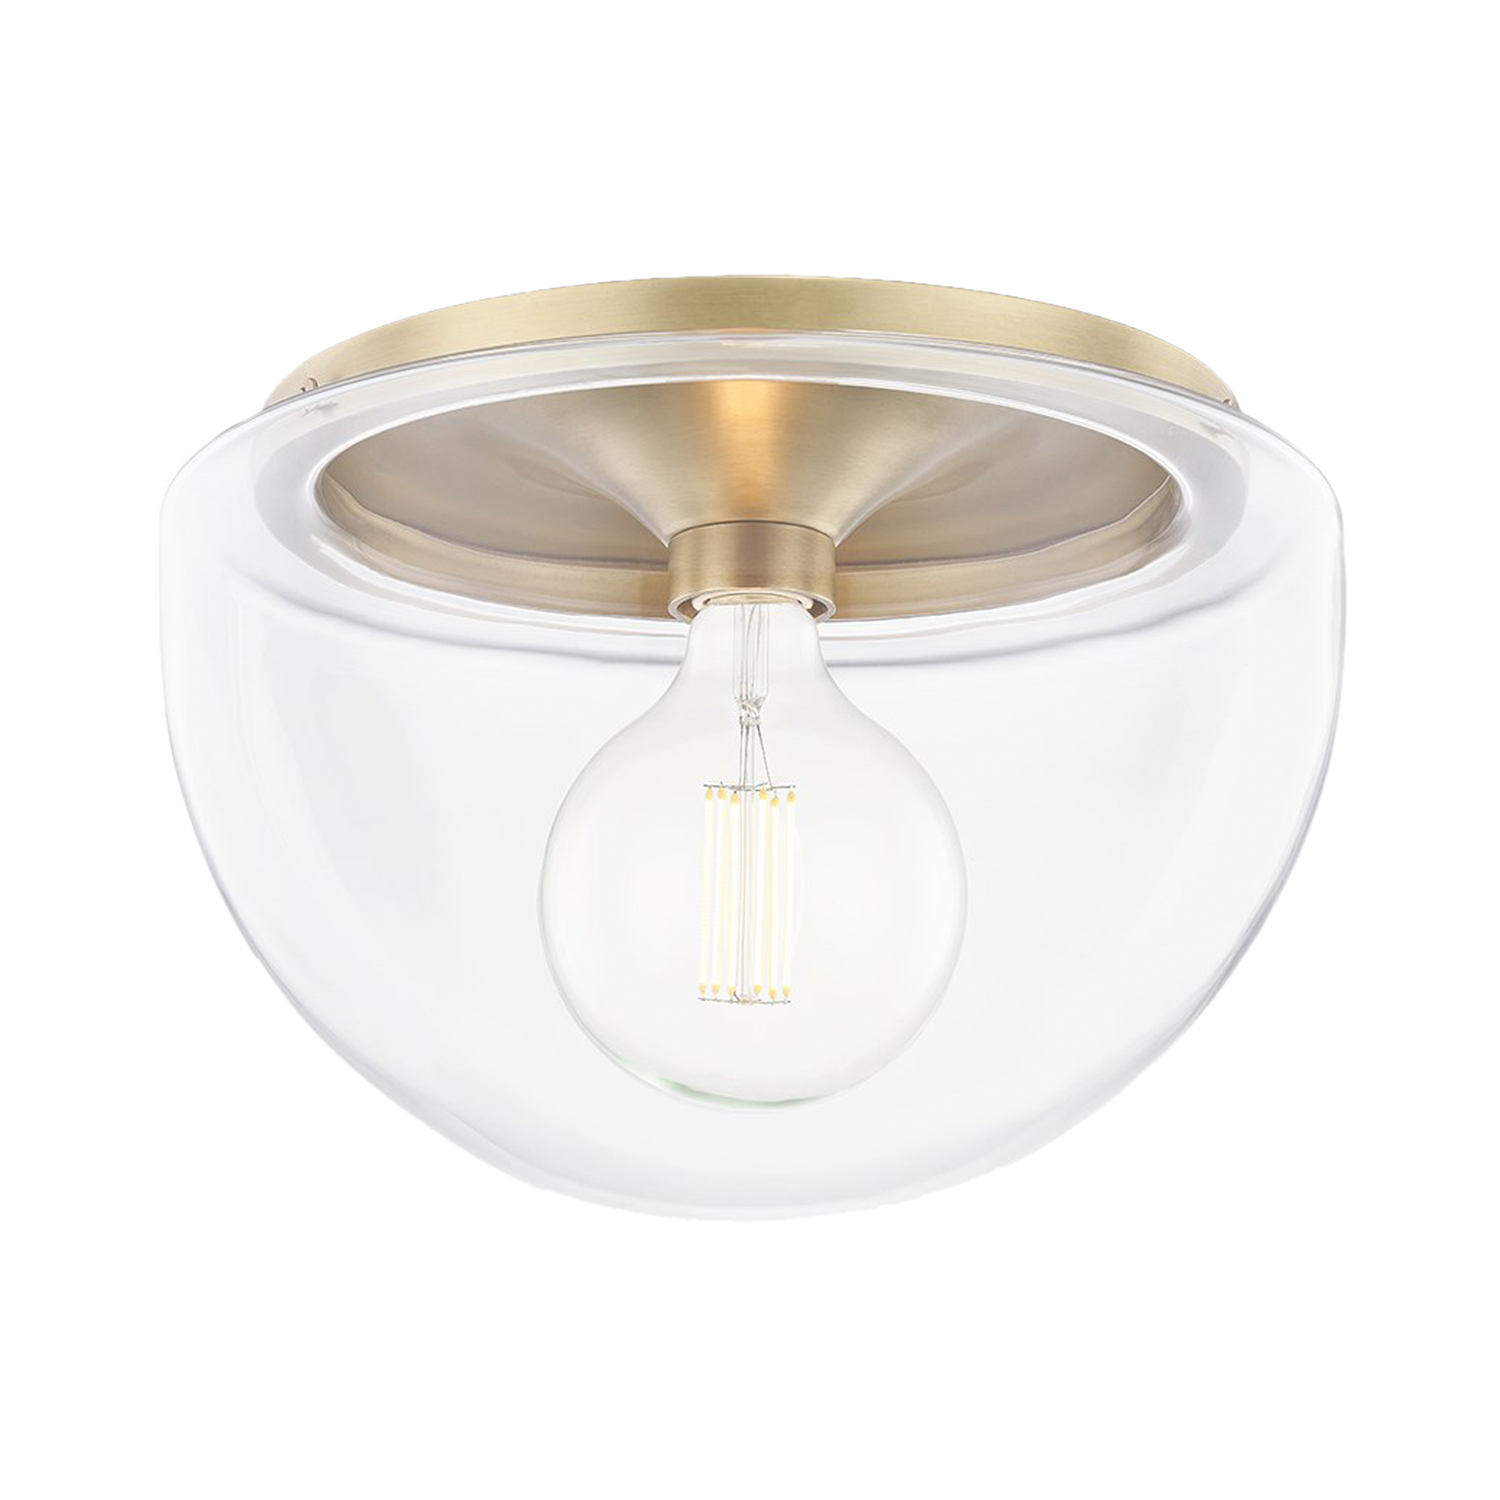 The Chicest Flush Mount Lighting: Trusted Favorites and Stylish Picks - The  Zhush